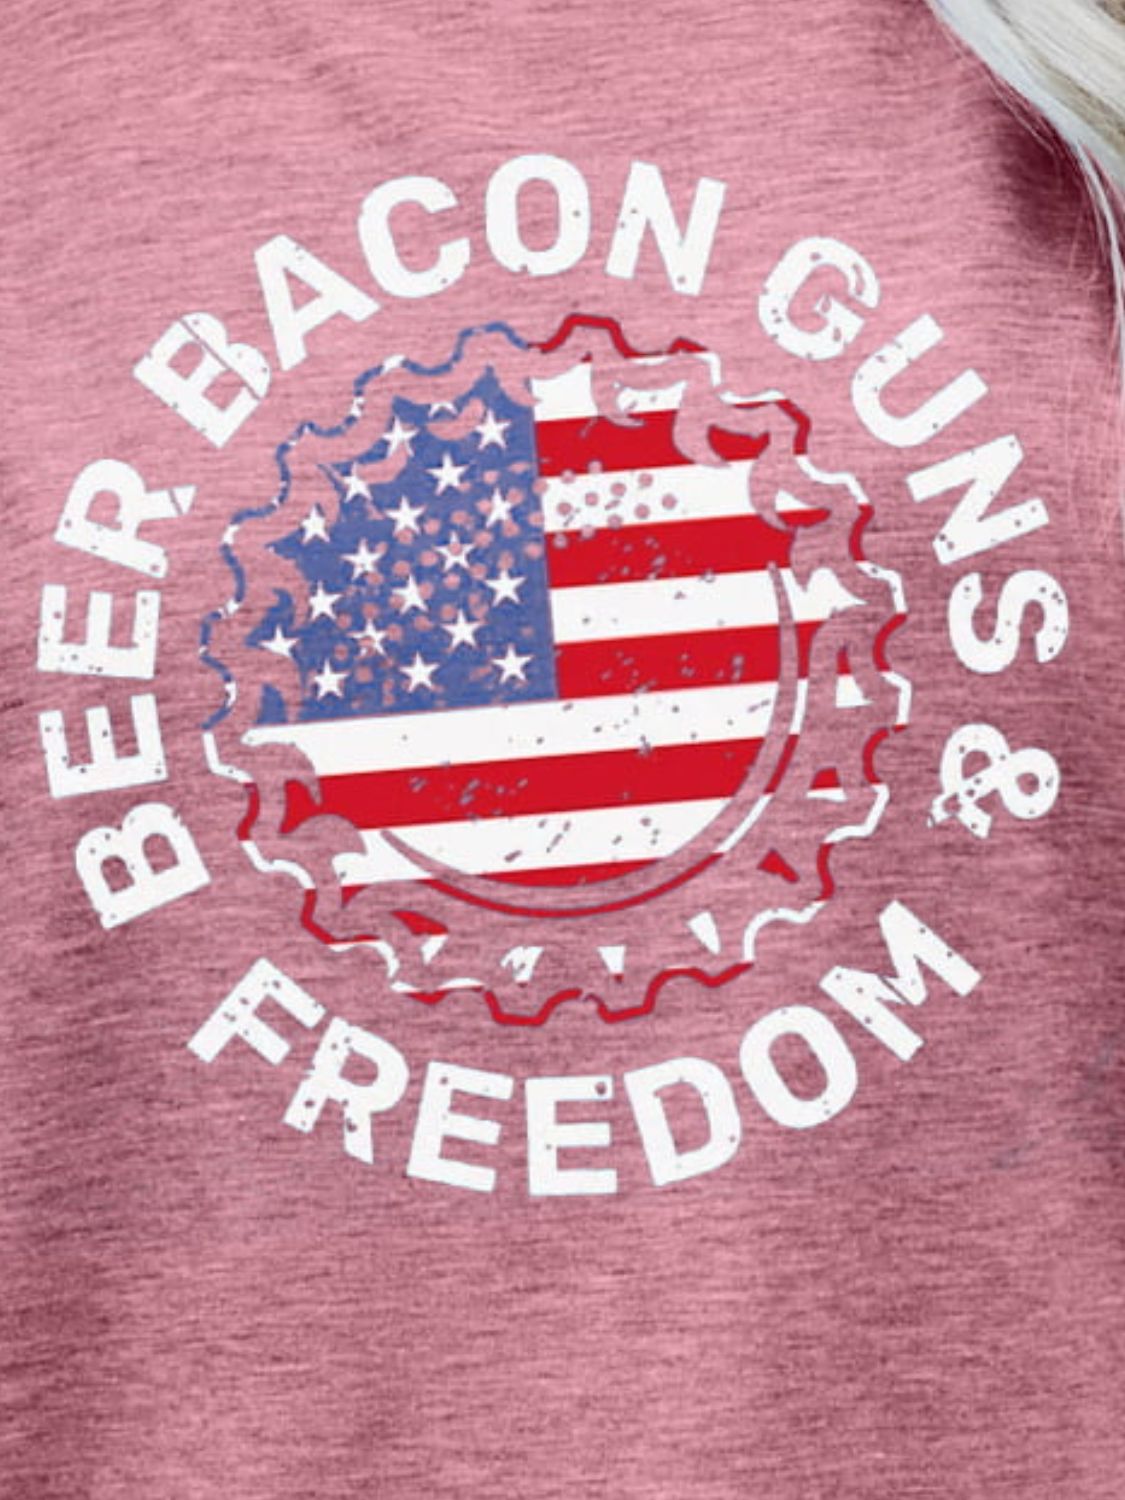 BEER BACON GUNS & FREEDOM US Flag Graphic Tee - OMG! Rose